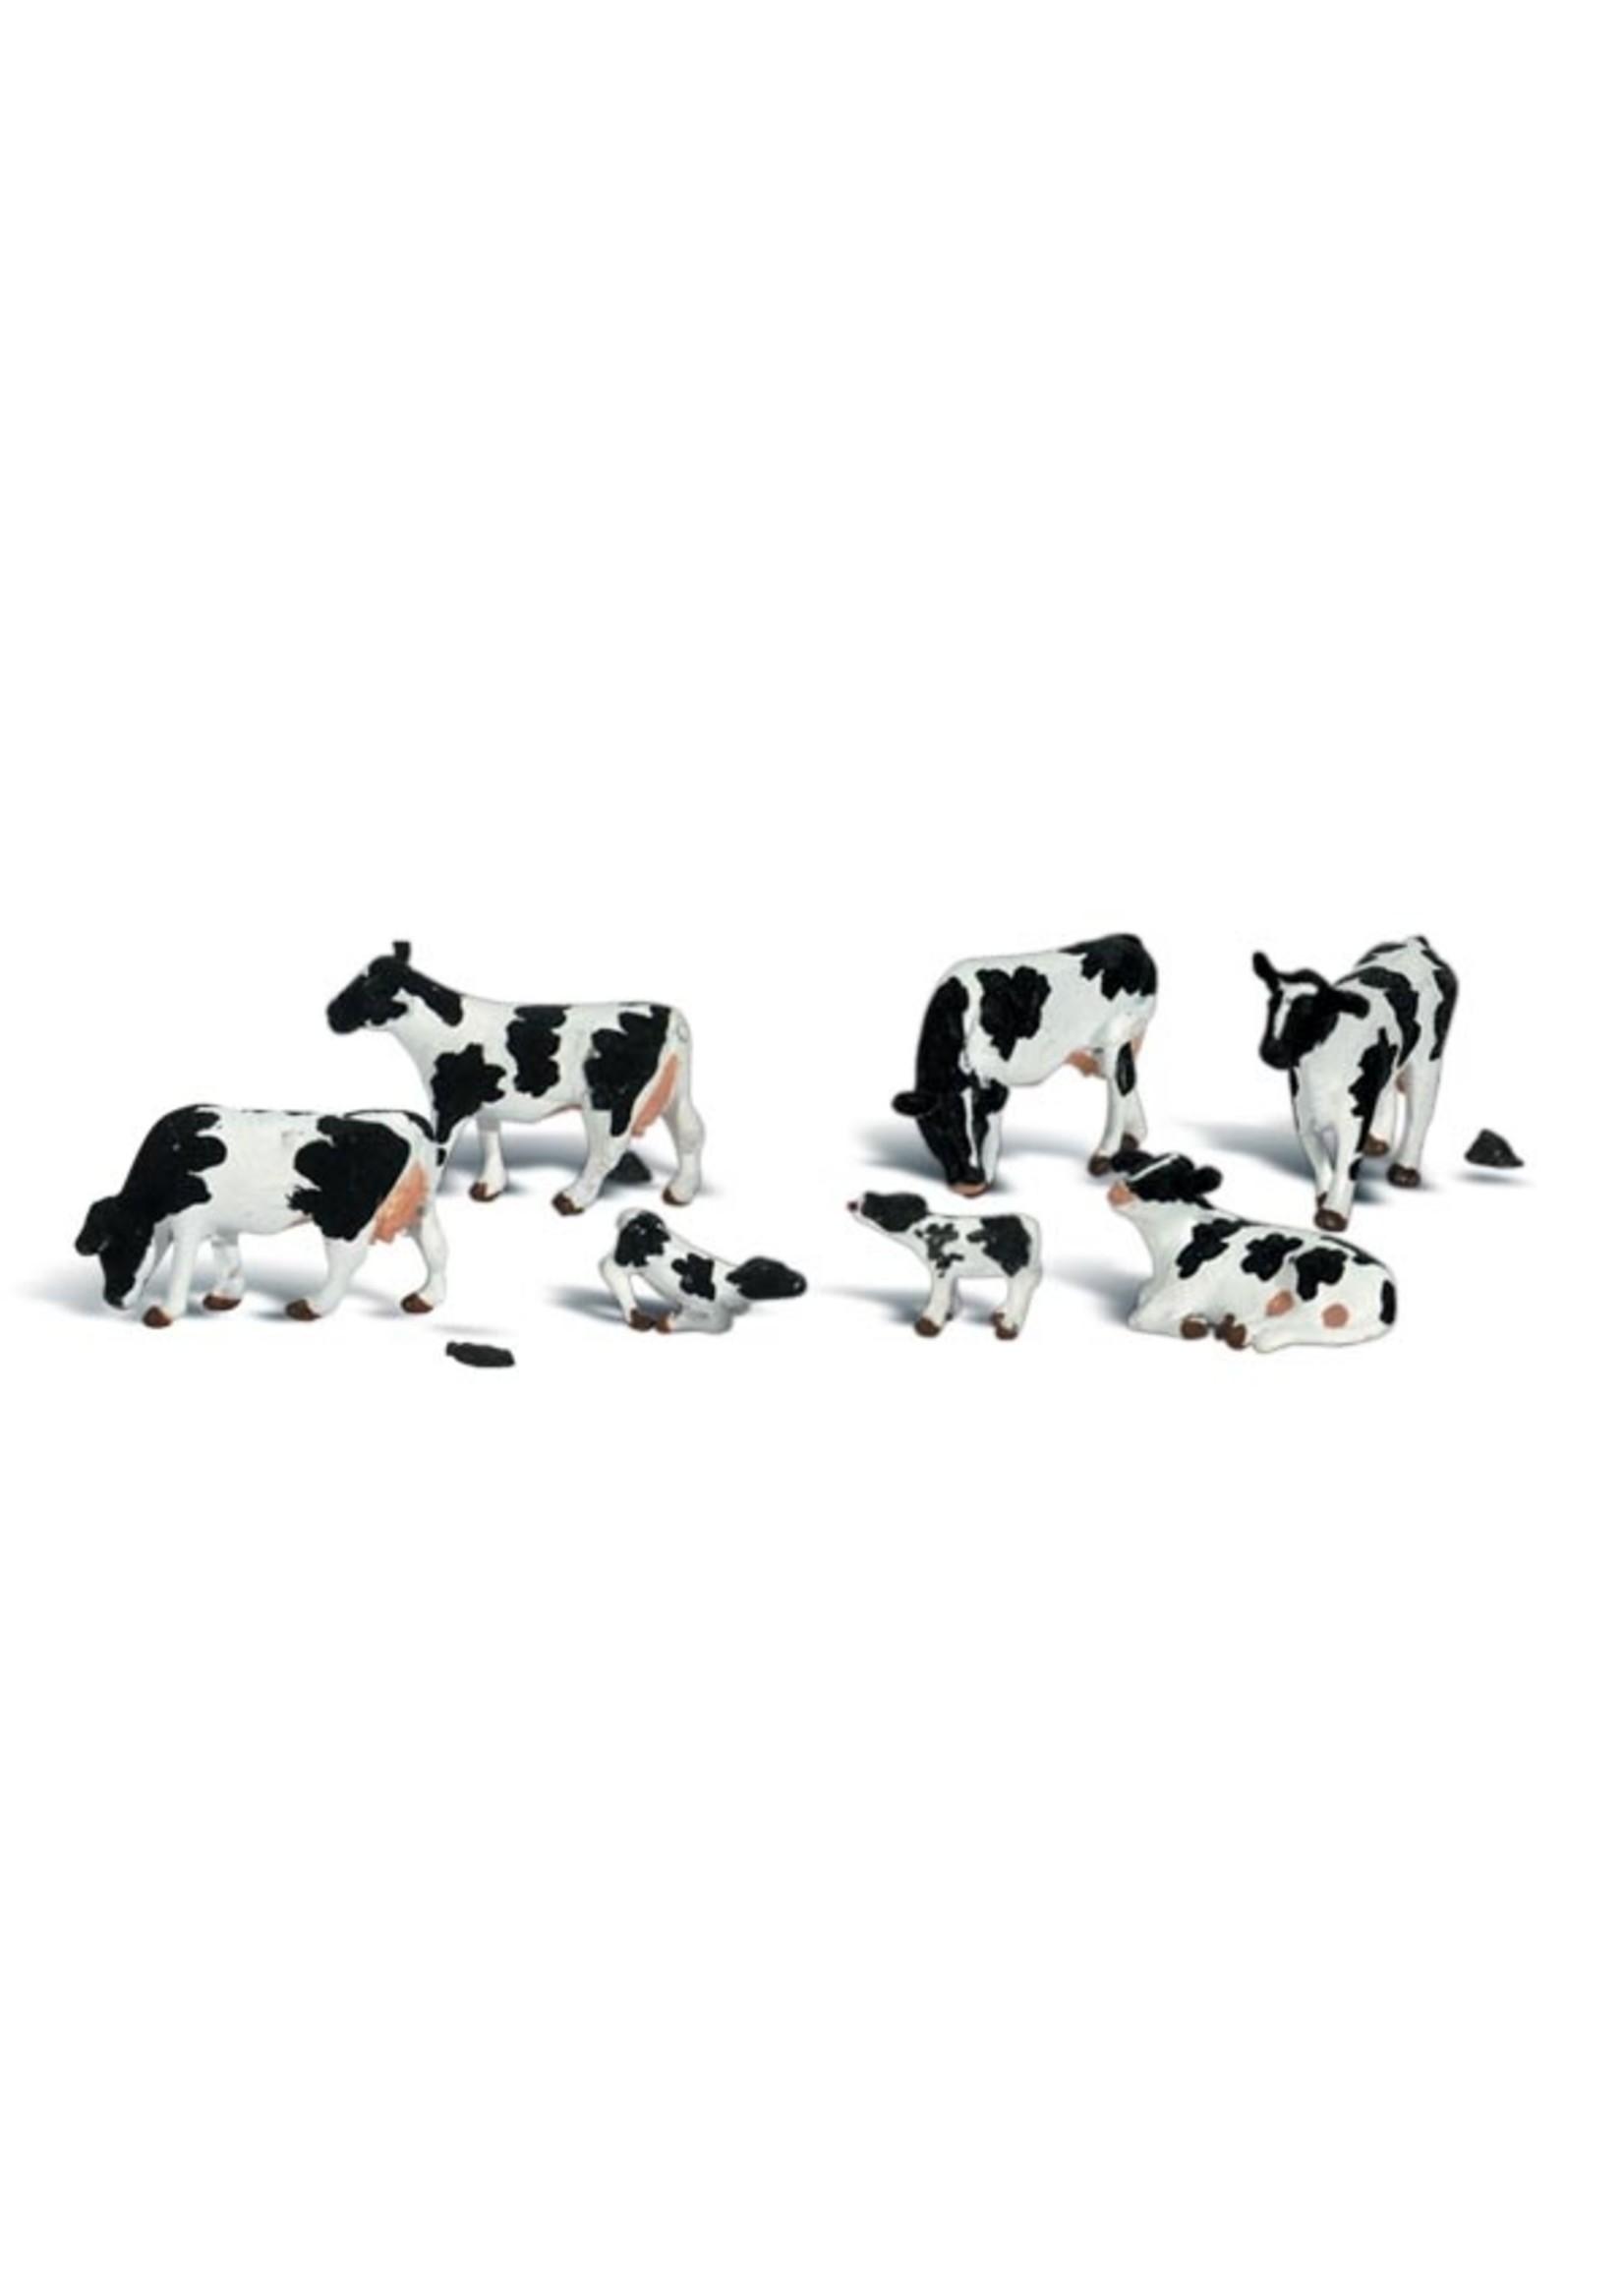 Woodland Scenics A2187 - N Scale Holstein Cows